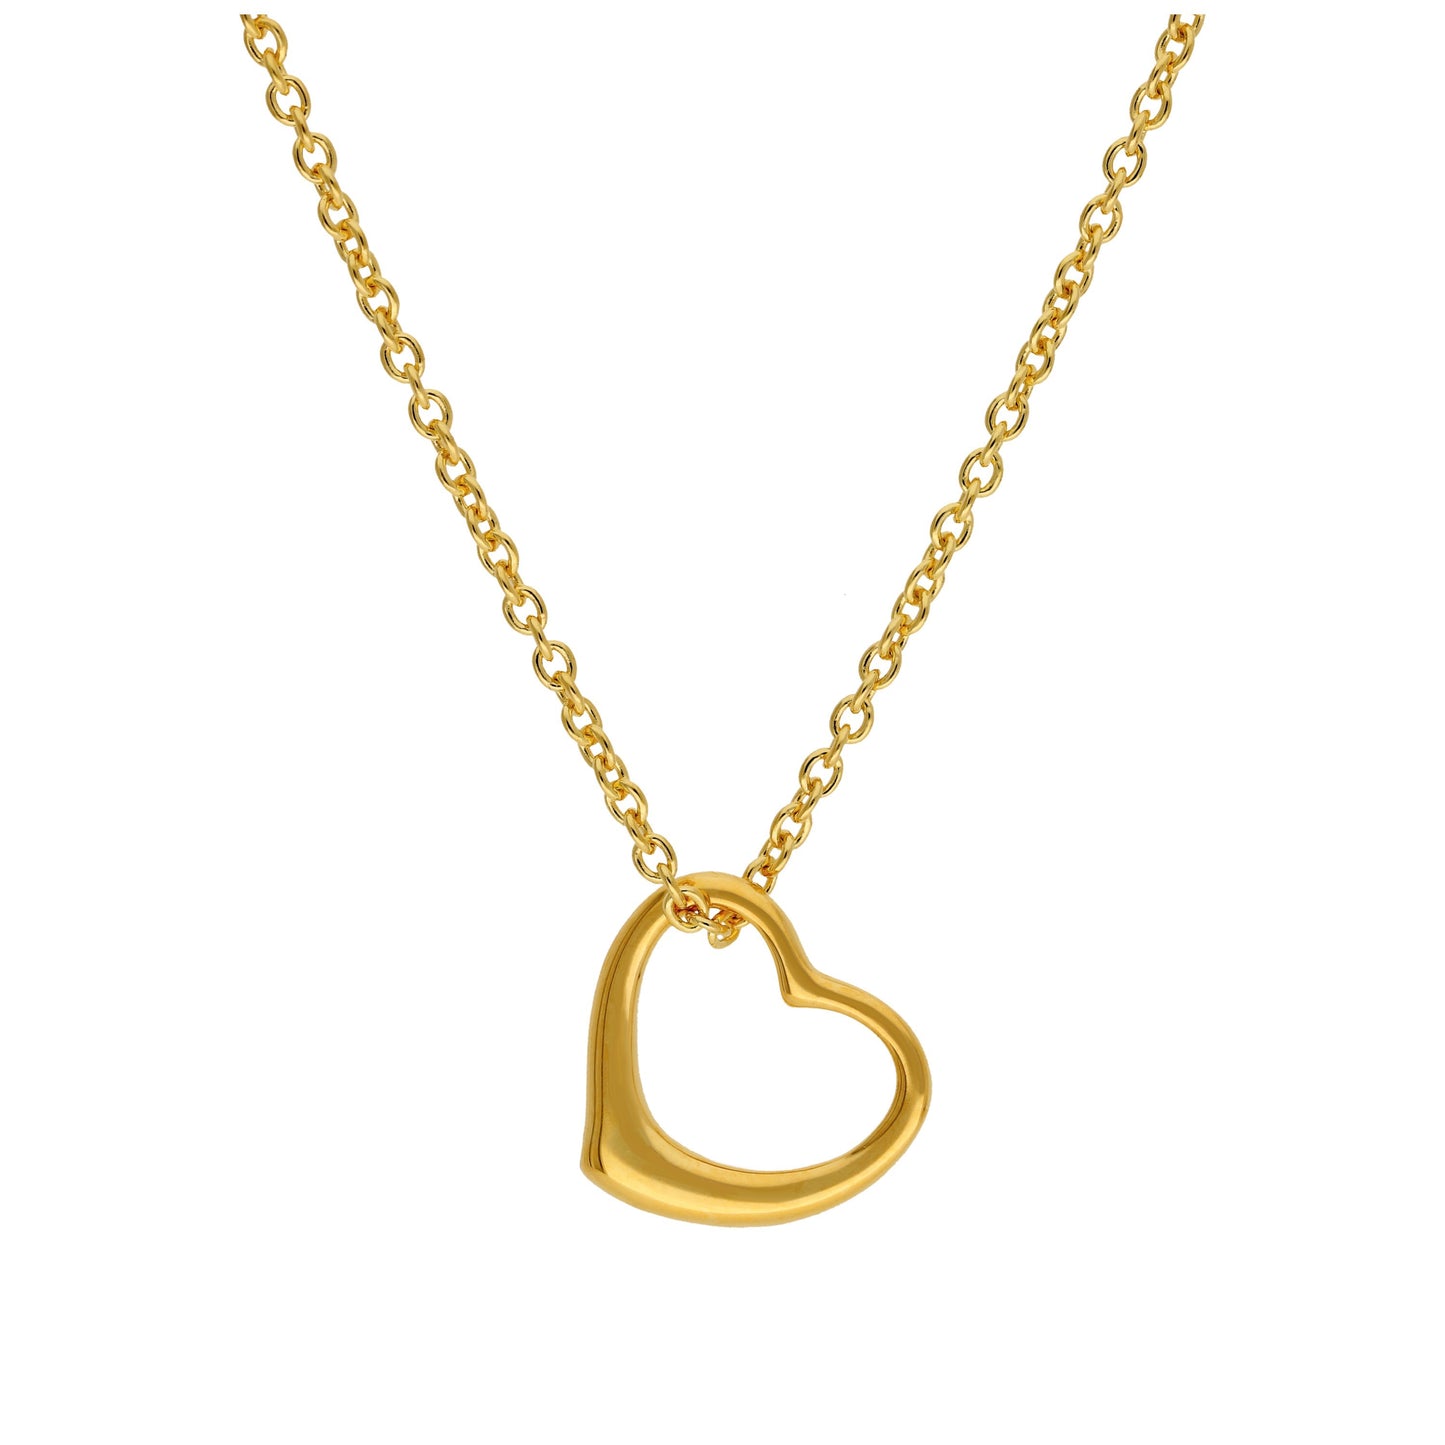 Gold Plated Sterling Silver Floating Heart Pendant Necklace 16 - 24 Inches